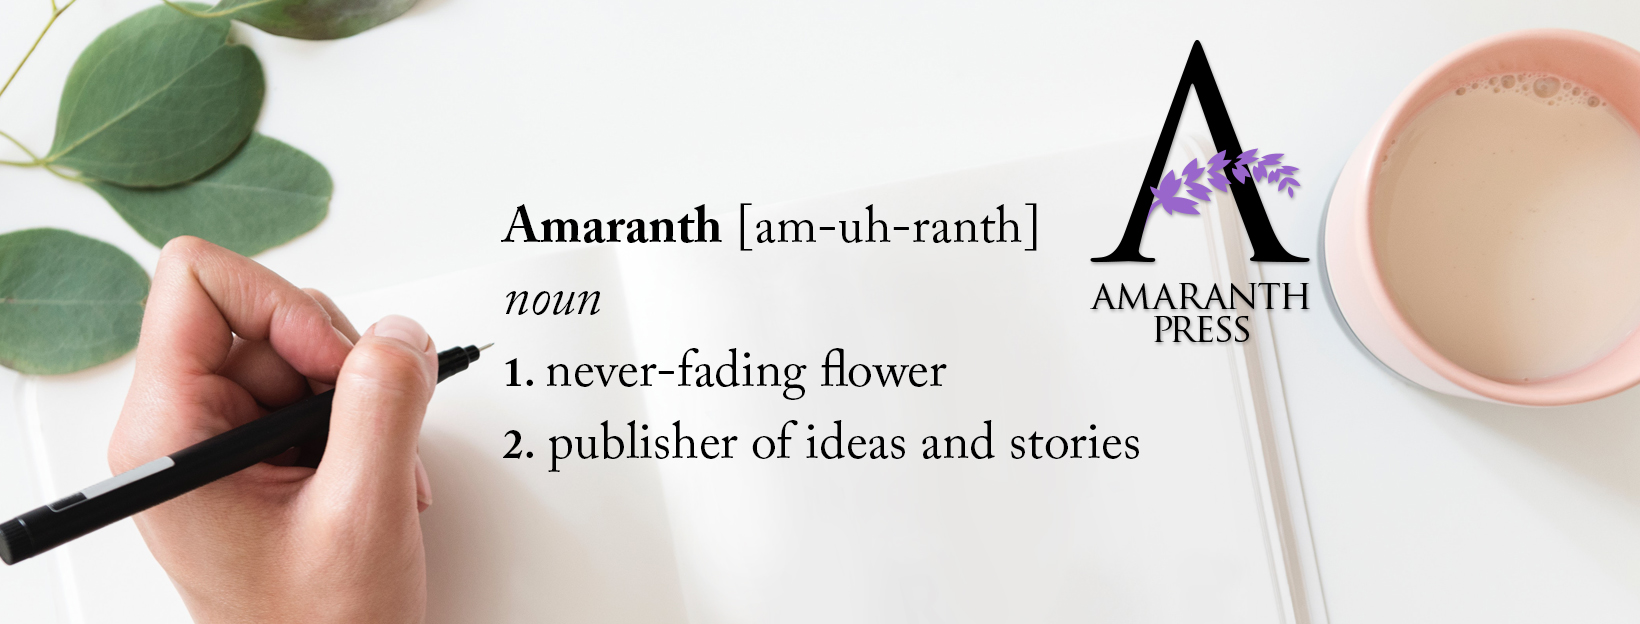 Dictionary description of Amaranth which is either a flower or a book publisher. Get help publishing your book